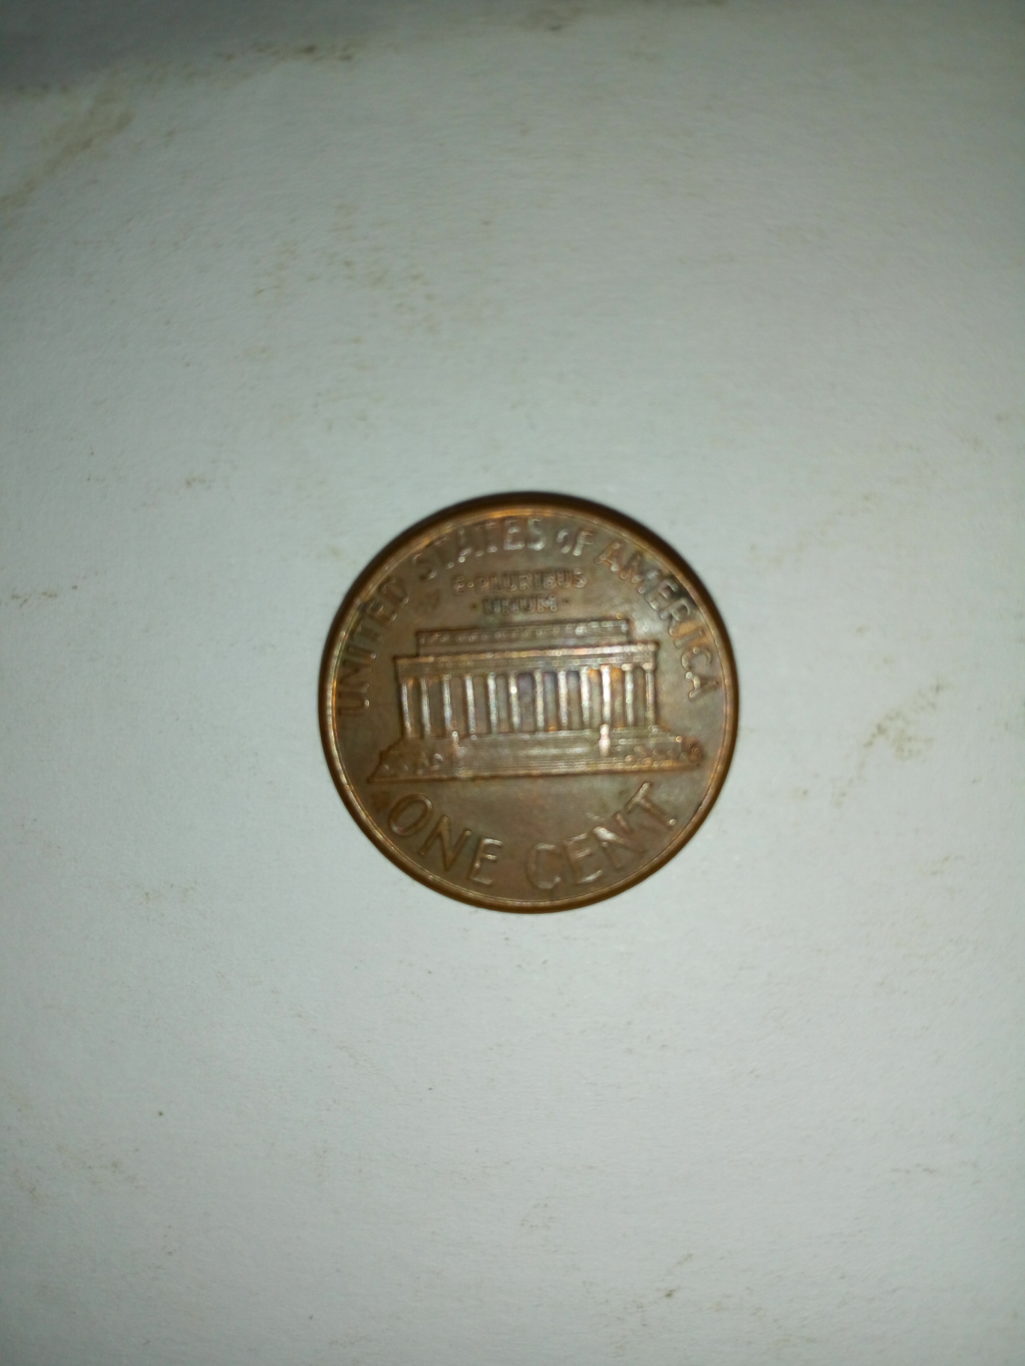 1992_united States of America 1 cent